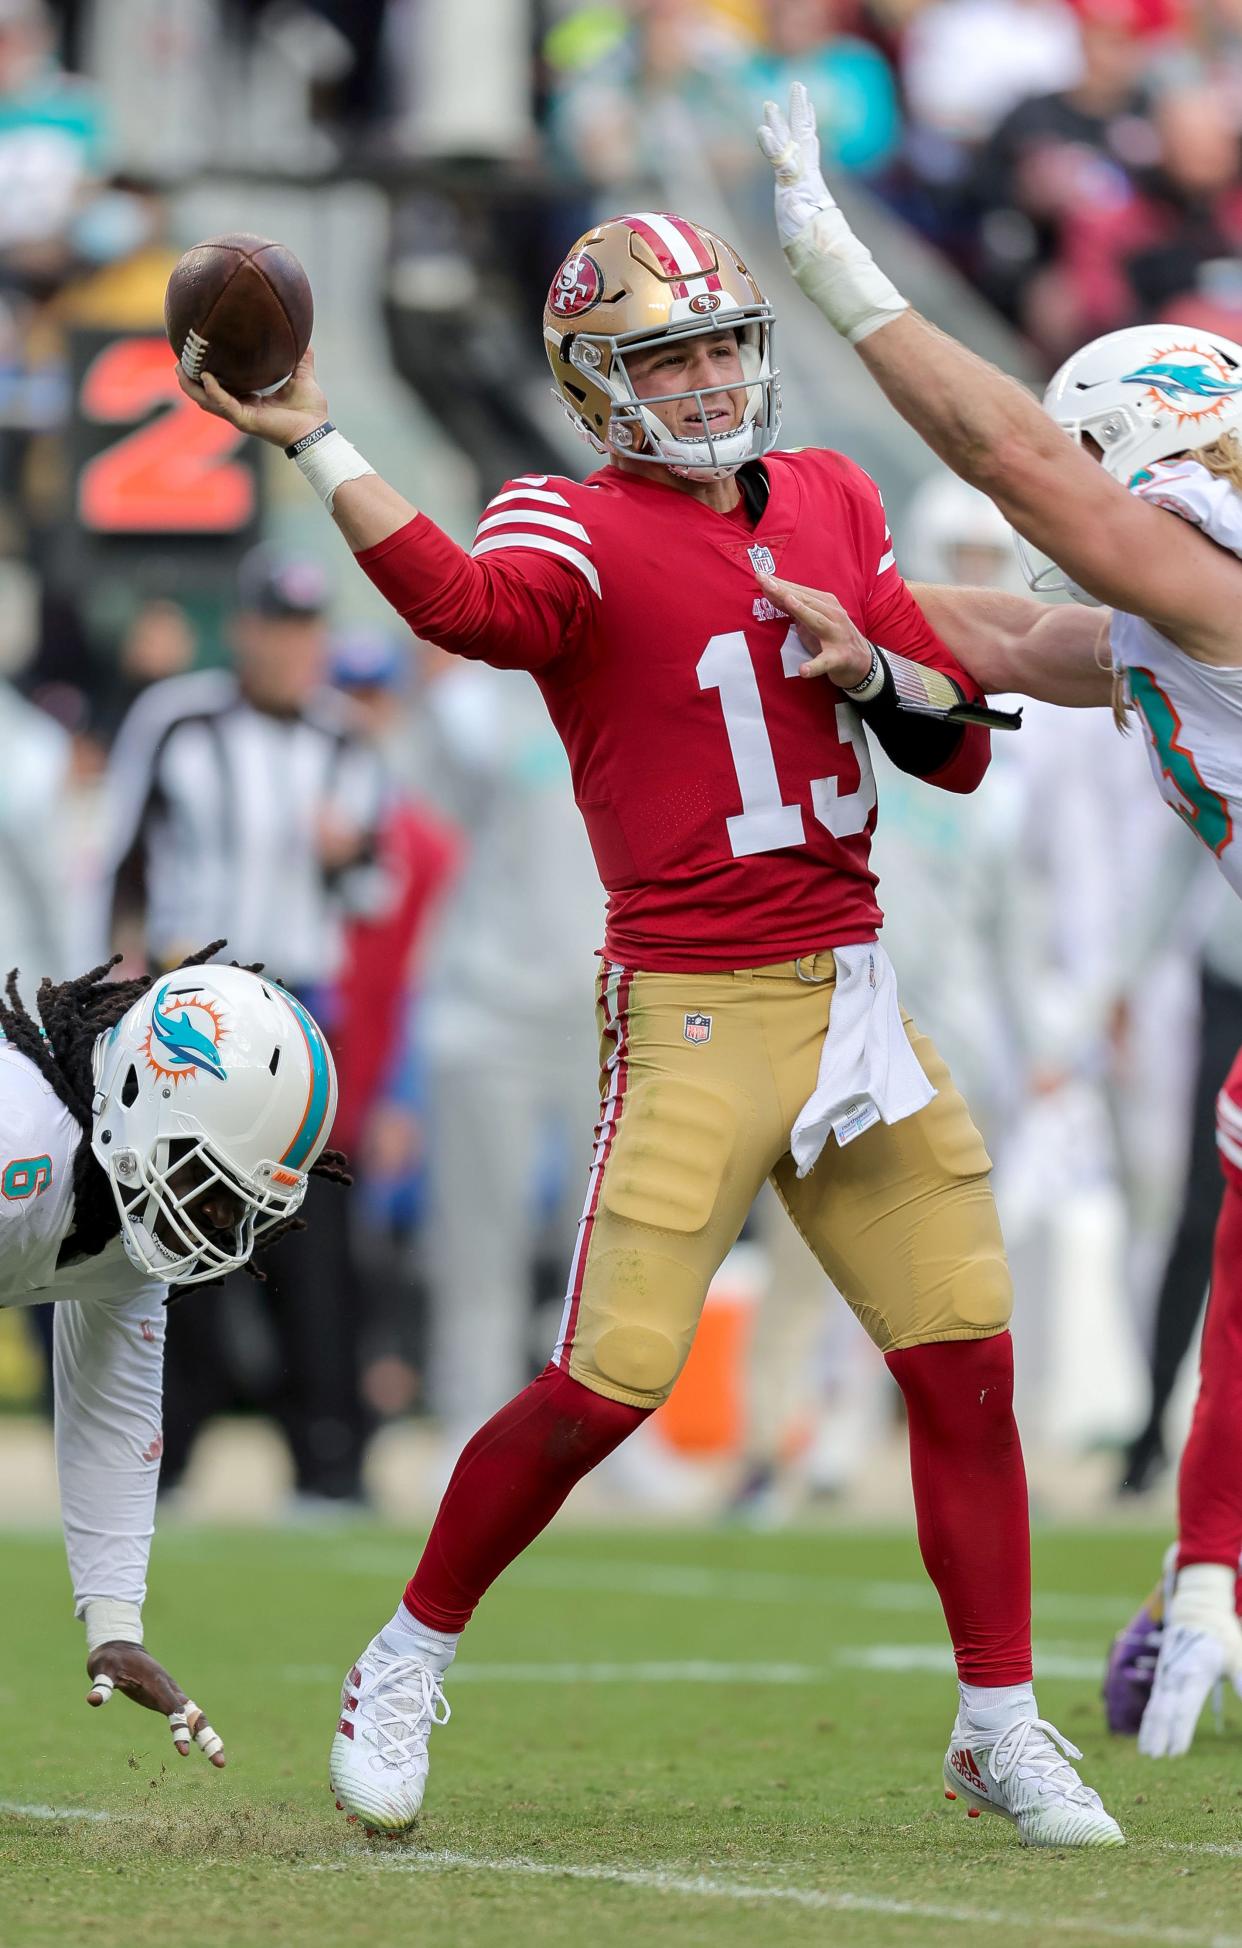 San Francisco 49ers quarterback Brock Purdy (13) throws a pass during the second quarter against the Miami Dolphins at Levi's Stadium.